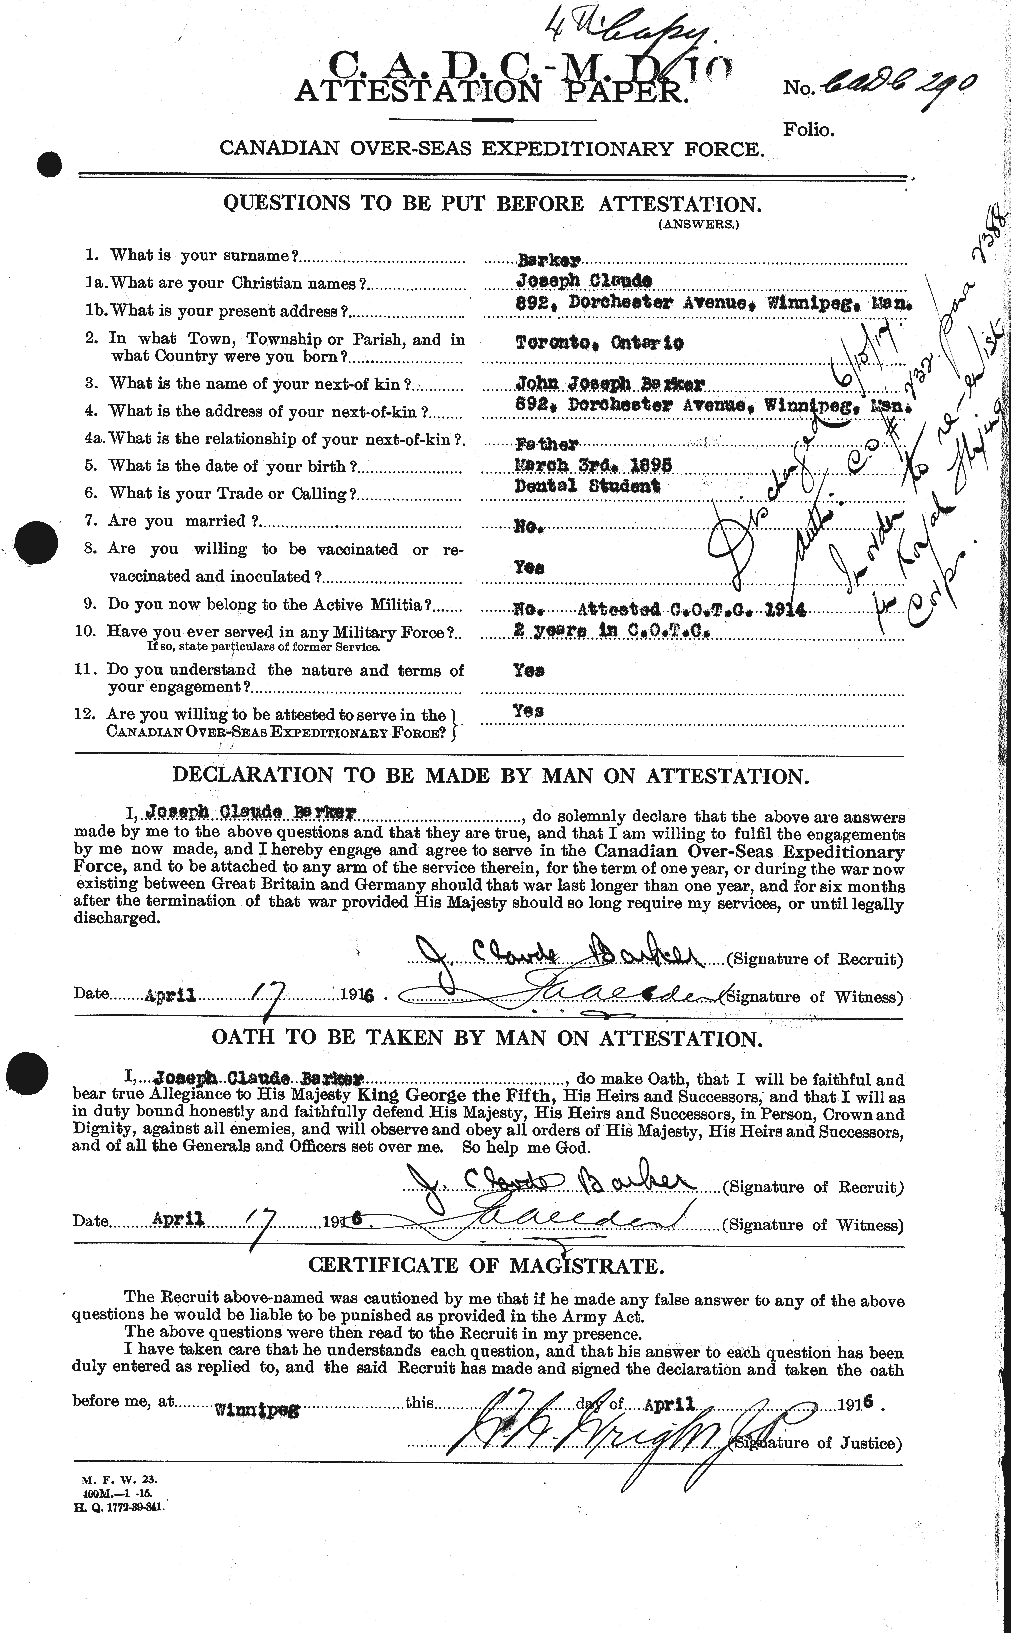 Personnel Records of the First World War - CEF 227003a